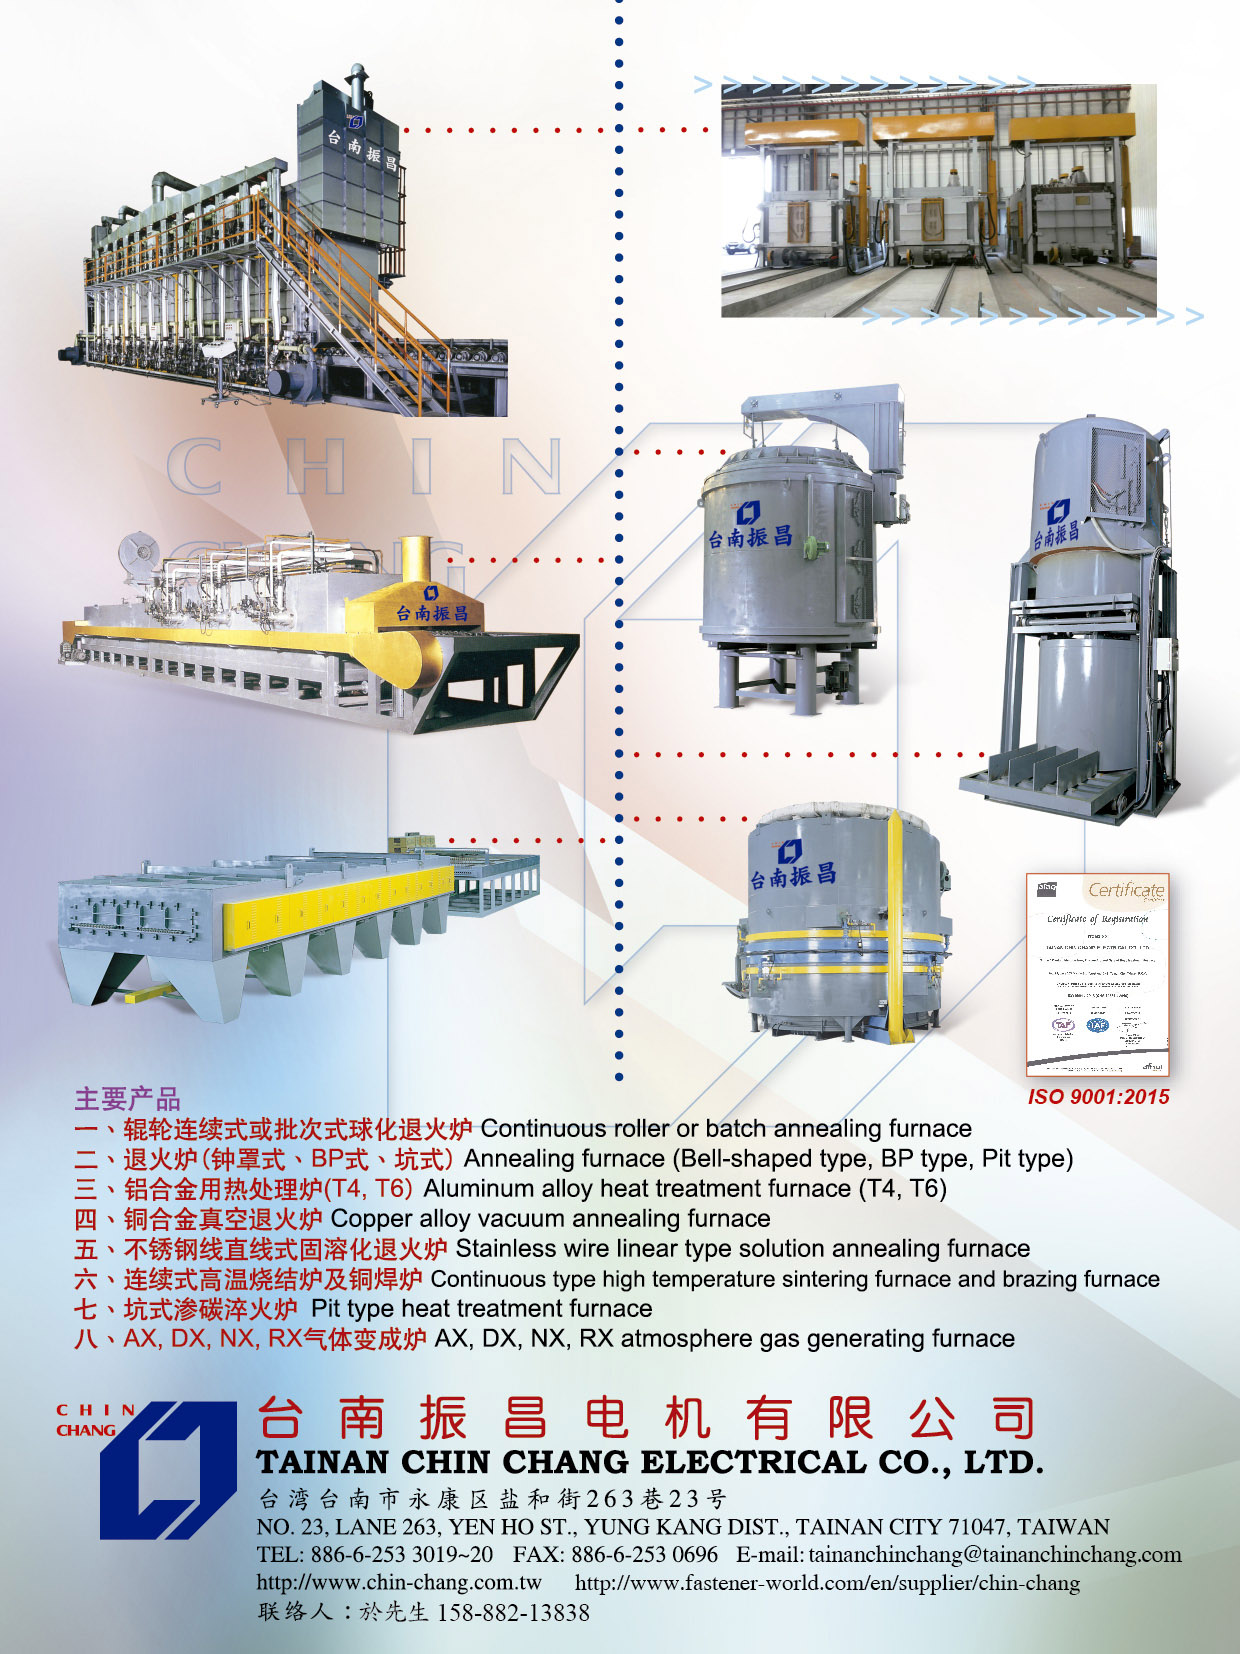 TAINAN CHIN CHANG ELECTRICAL CO., LTD.  , Continuous roller or batch annealing furnace, Annealing furnace (Bell-shaped type, BP type, Pit type), Aluminum alloy heat treatment furnace (T4, T6), Copper alloy vacuum annealing furnace, Stainless wire linear type solution annealing furnace, Continuous type high temperature sintering furnace and brazing furnace, Pit type heat treatment furnace, AX/DX/NX/RX atmosphere gas generating furnace , Annealing Furnace